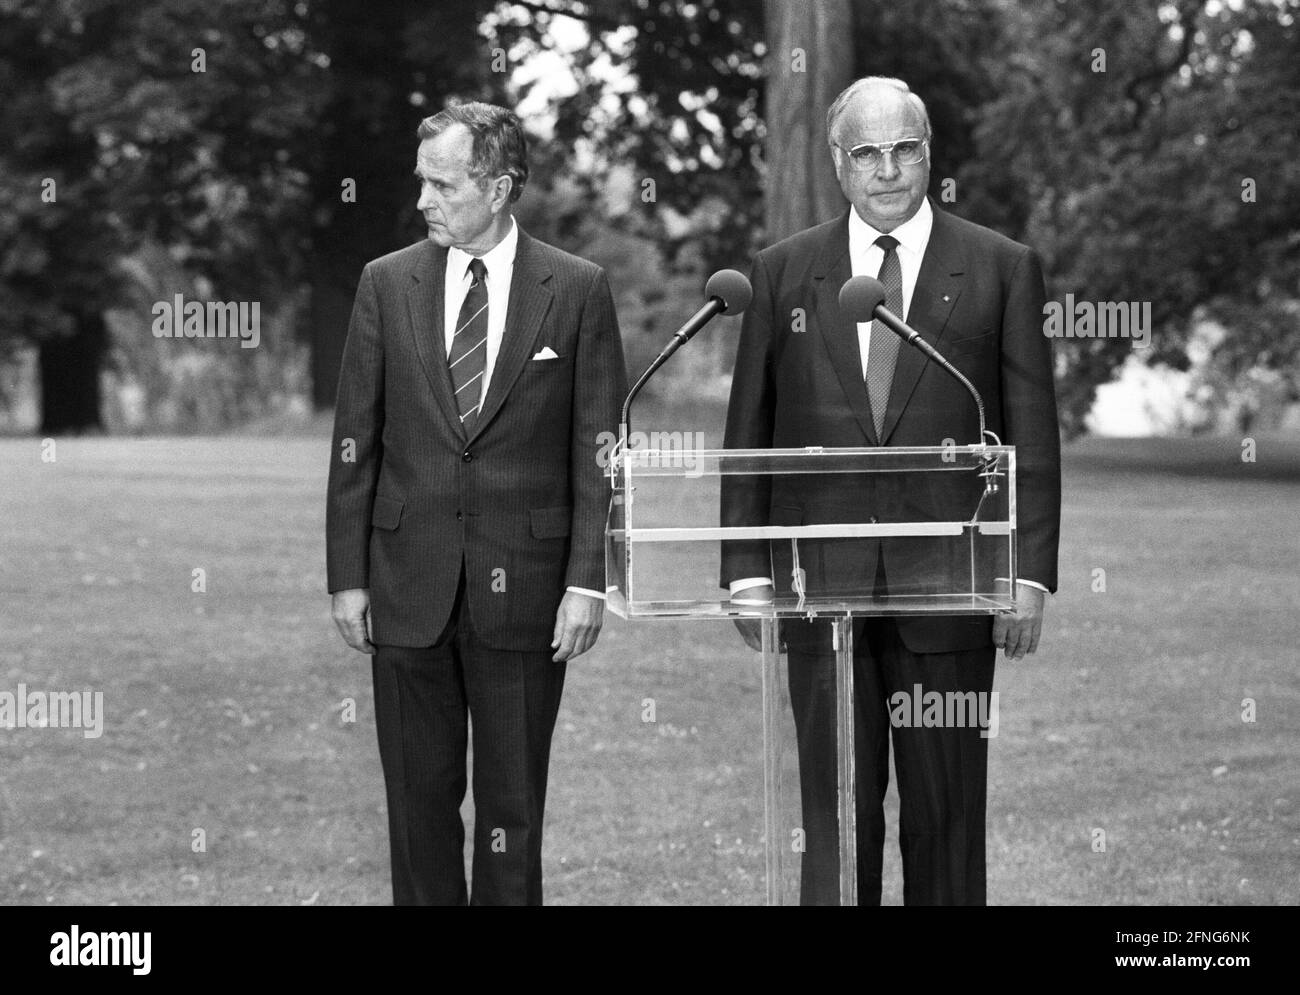 Germany, Bonn, 30.05.1989 Archive No.: 06-62-32 Visit of the American President Photo: Federal Chancellor Helmut Kohl and George H. W. Bush [automated translation] Stock Photo